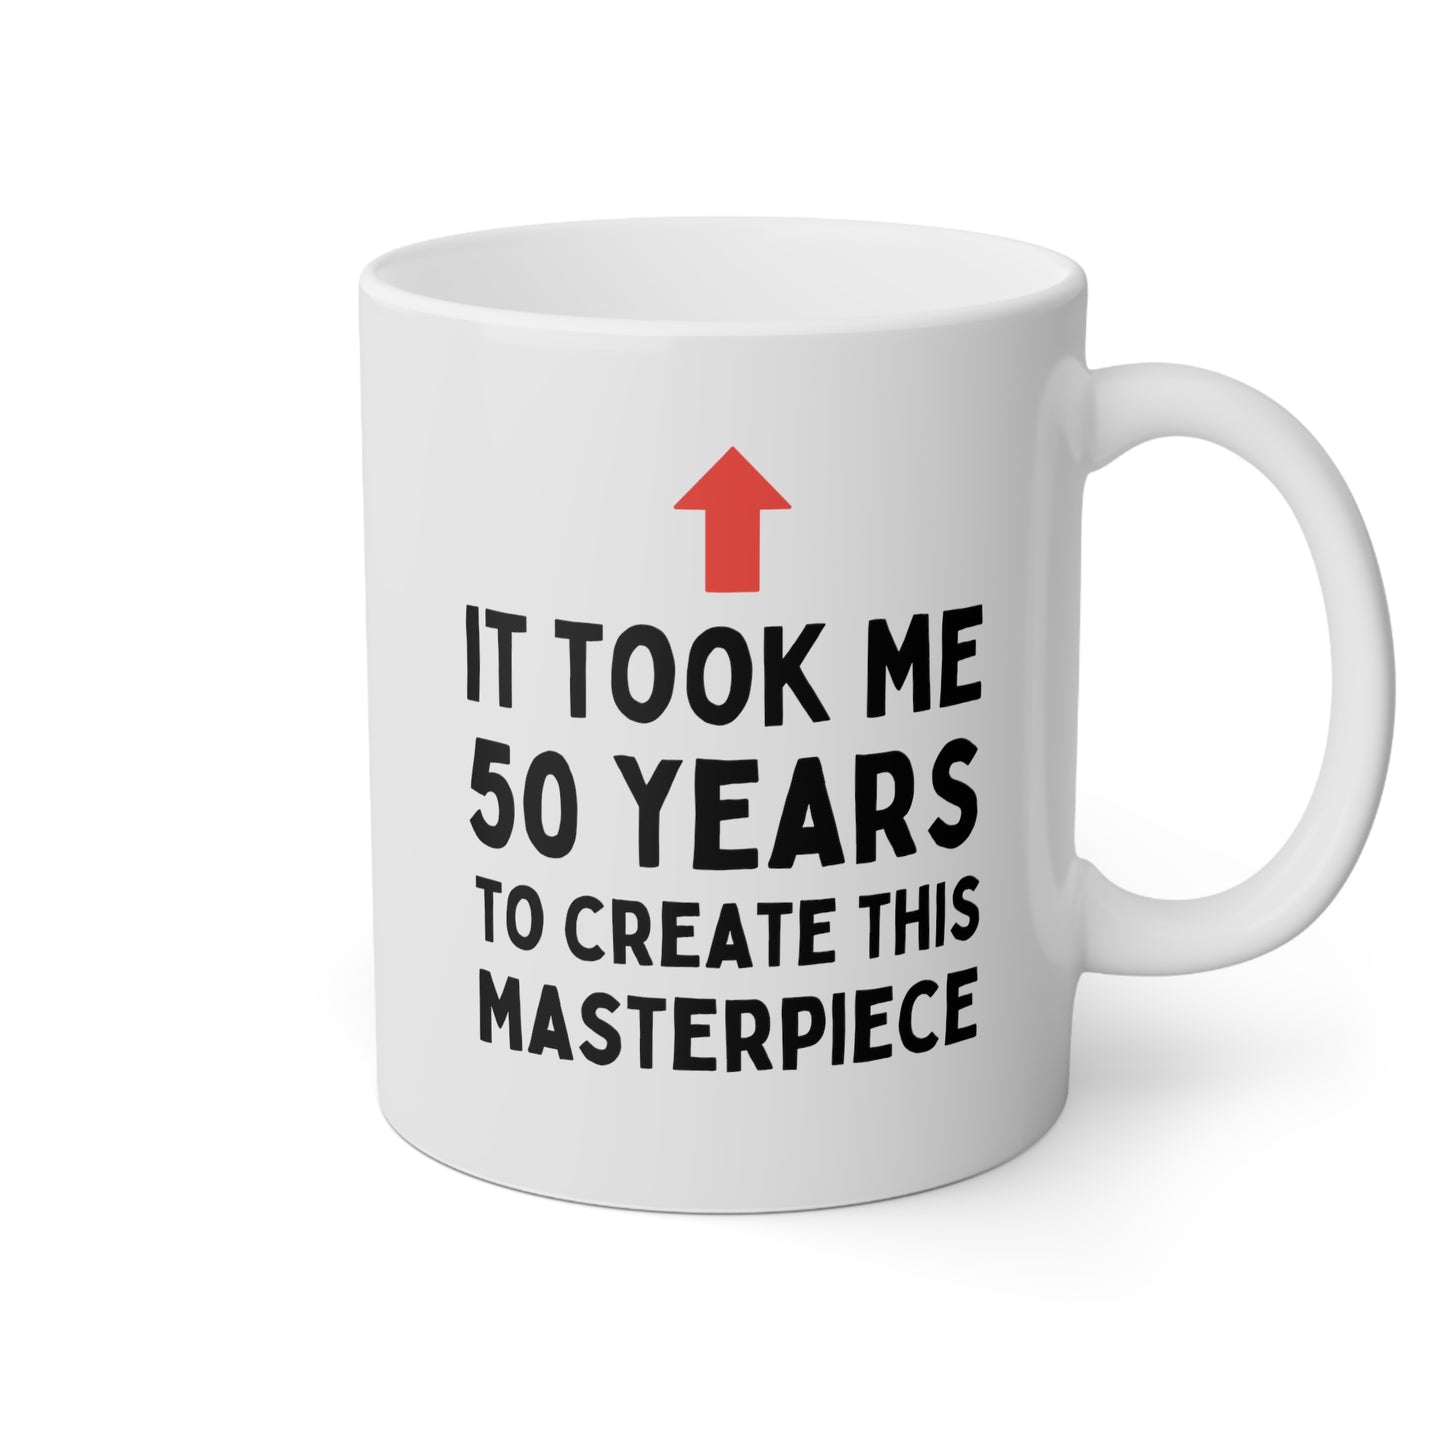 It Took Me 50 Years To Create This Masterpiece 11oz white funny large coffee mug gift for birthday custom date grandfather father husband waveywares wavey wares wavywares wavy wares